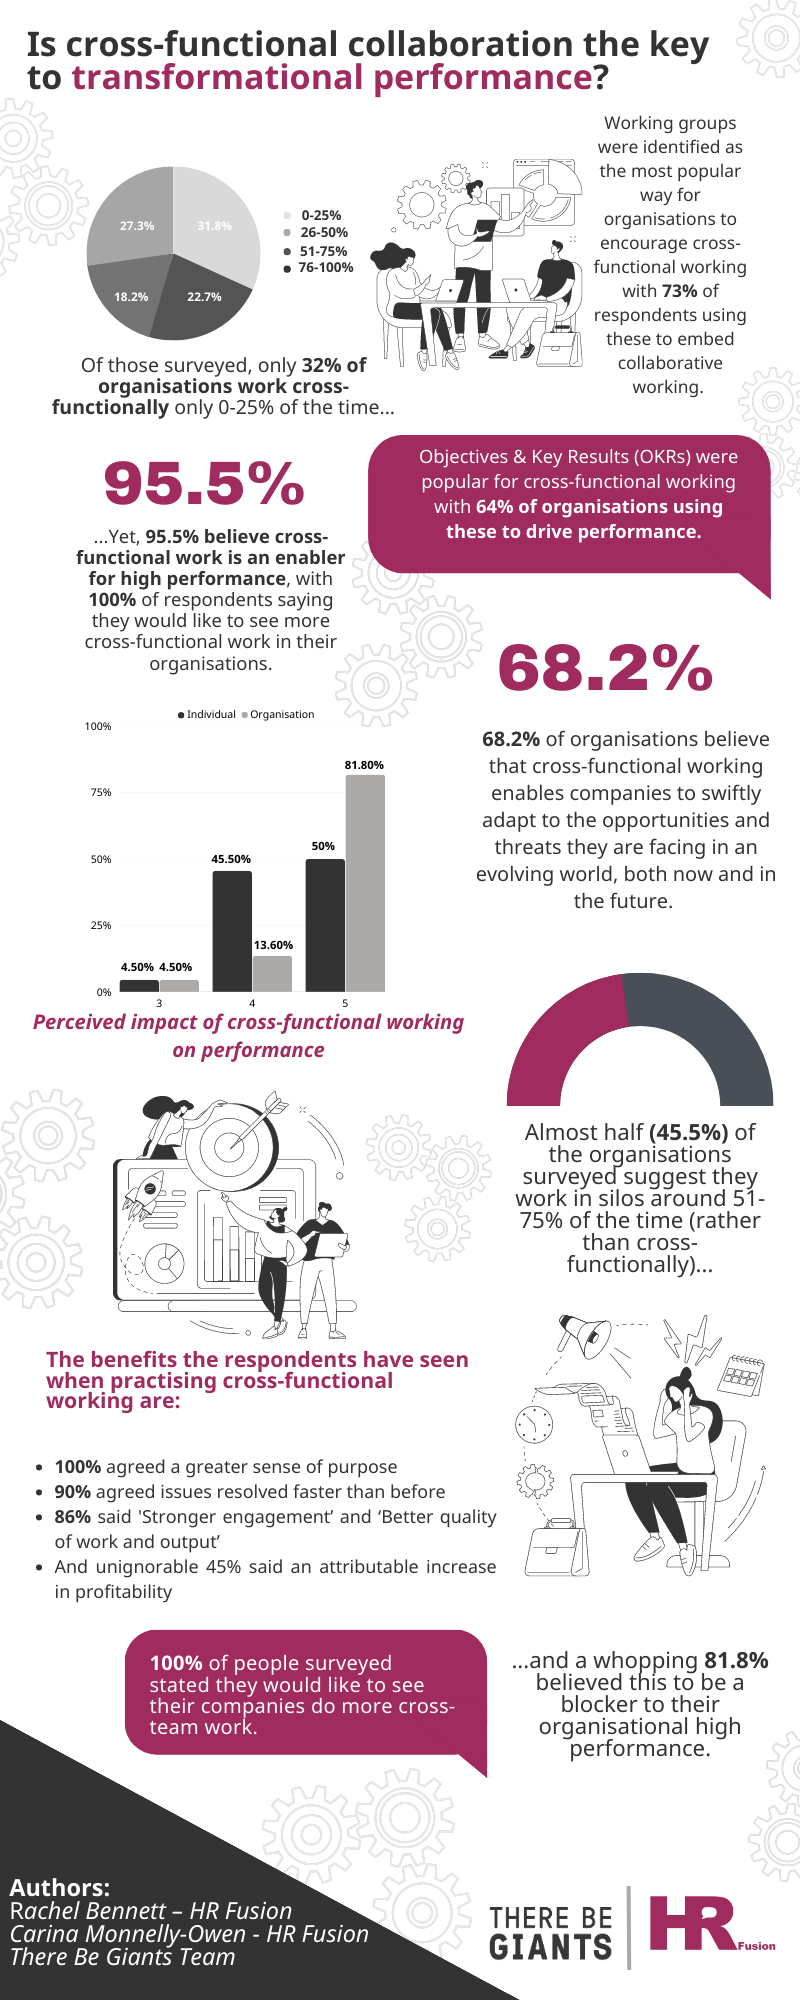 Is cross-functional collaboration the key to transformational performance INFOGRAPHIC (Infographic)